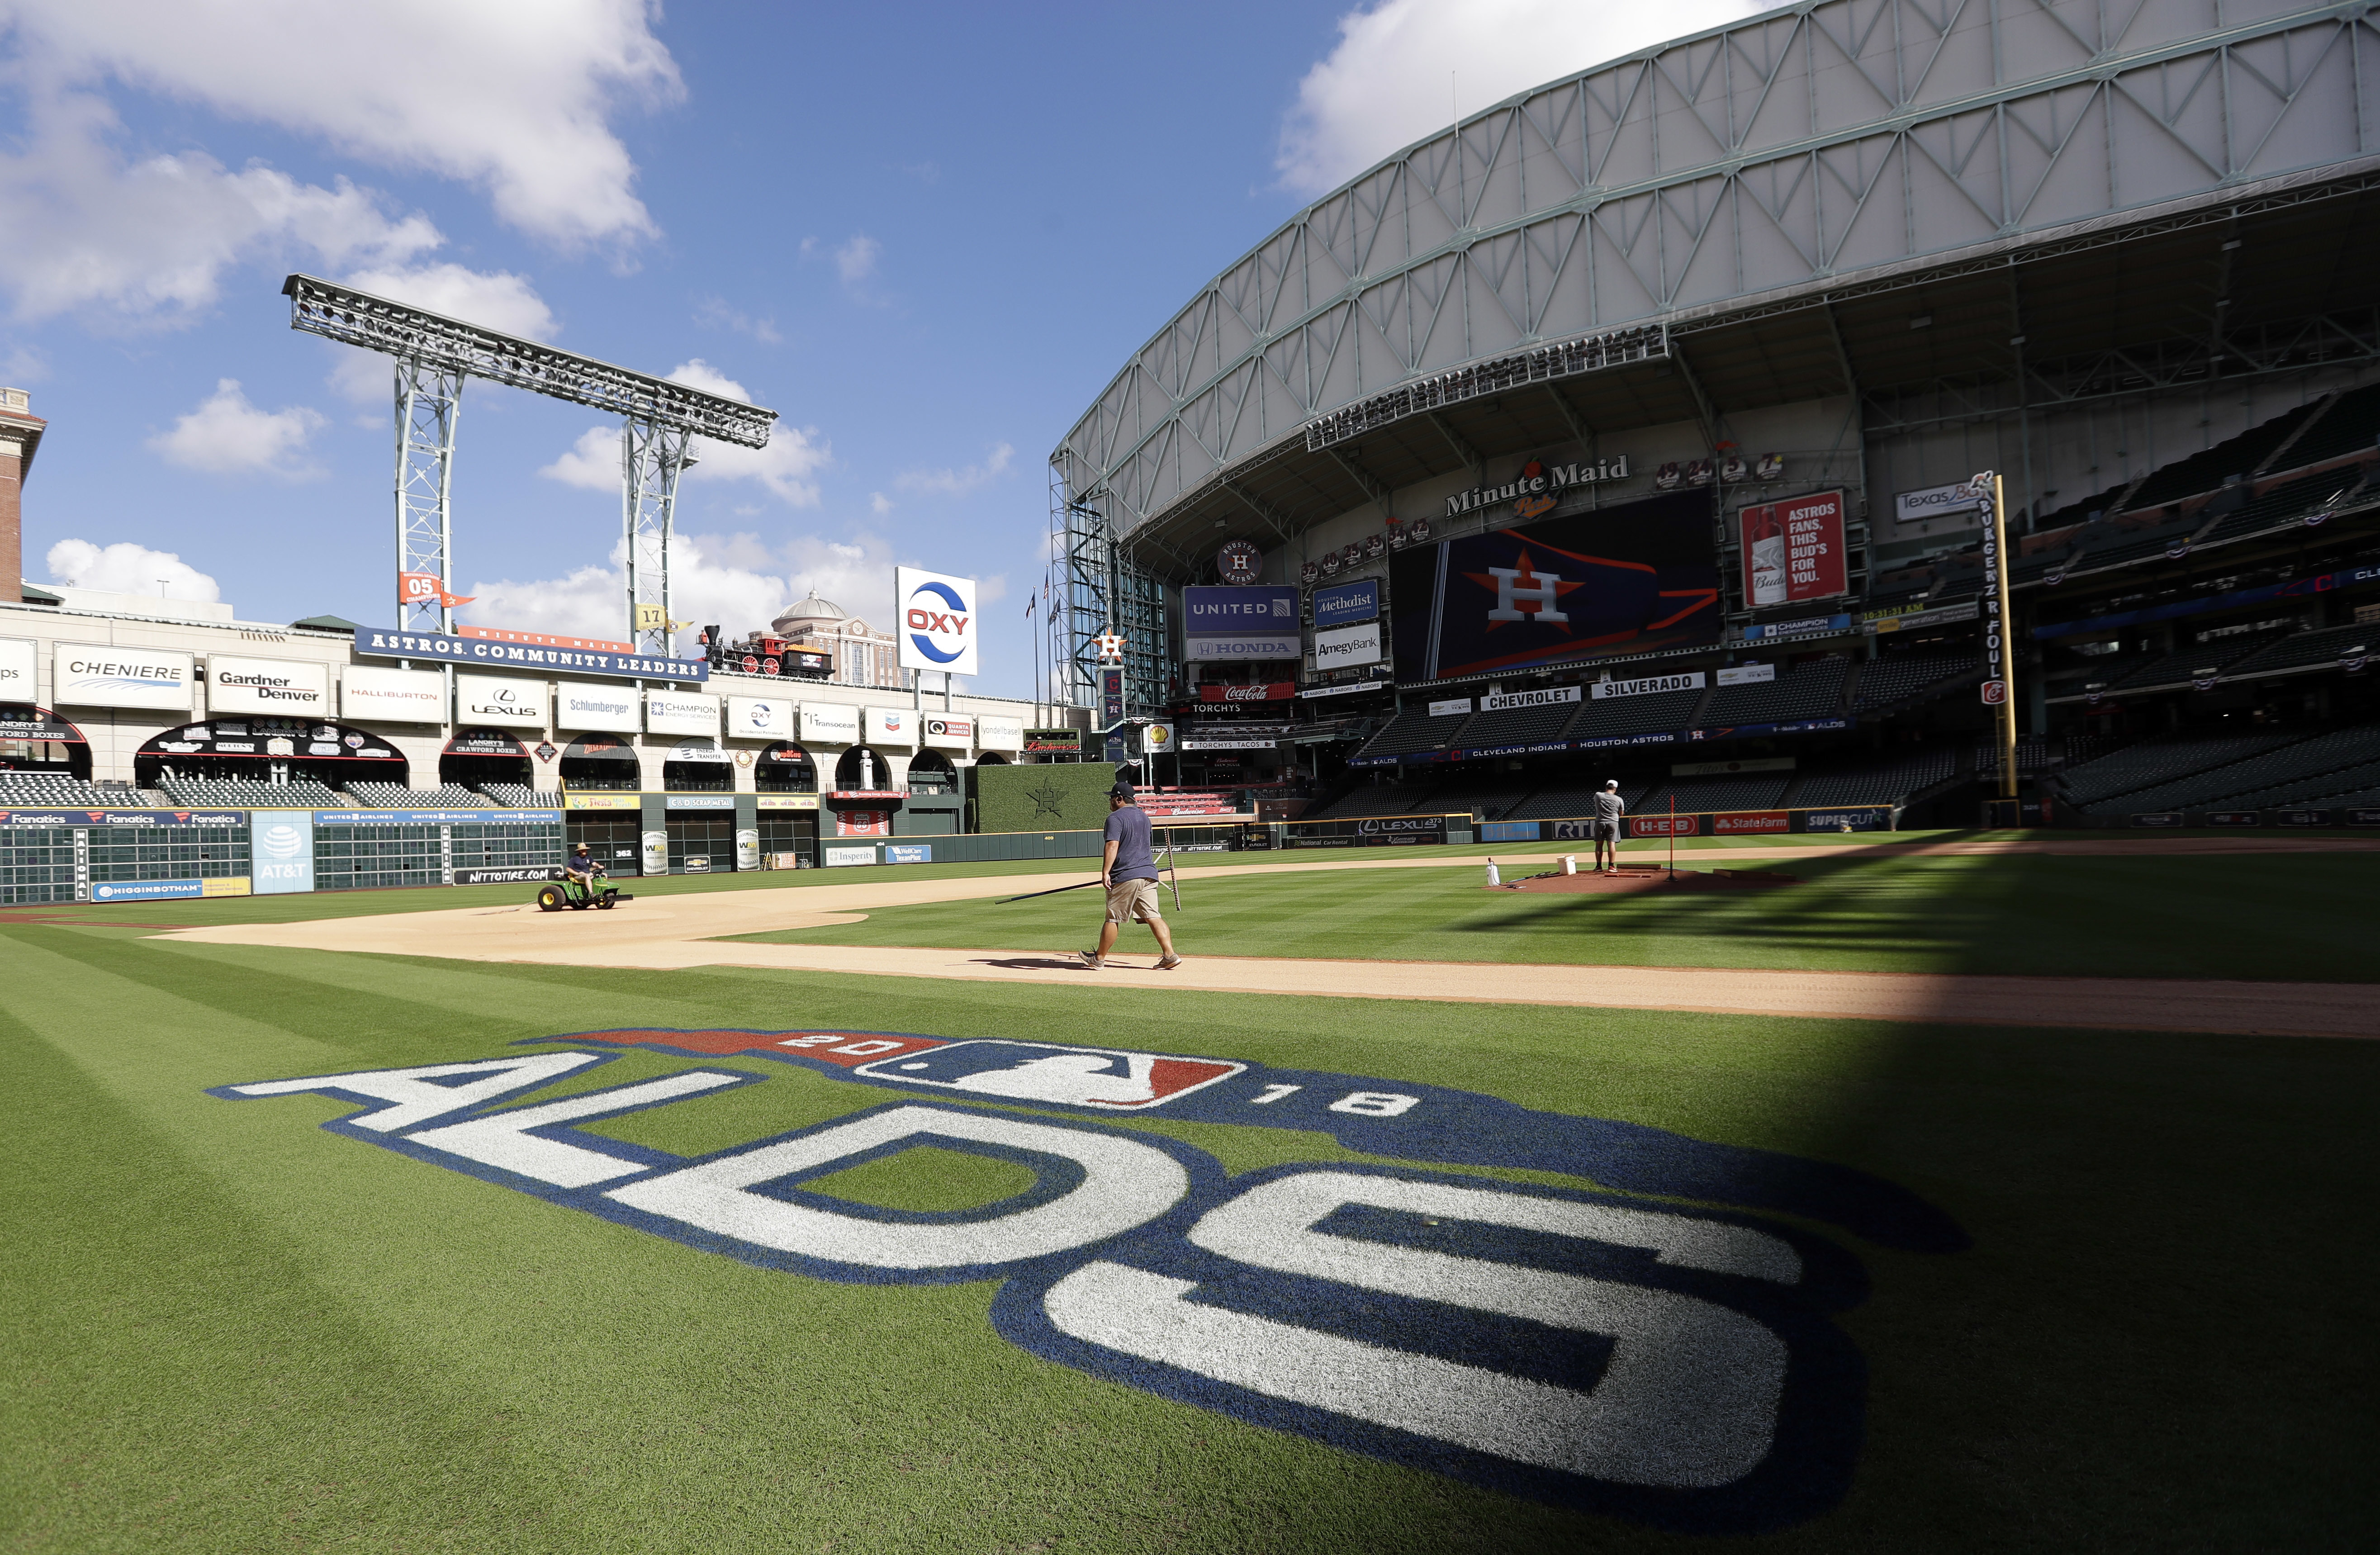 Contact Us, Minute Maid Park